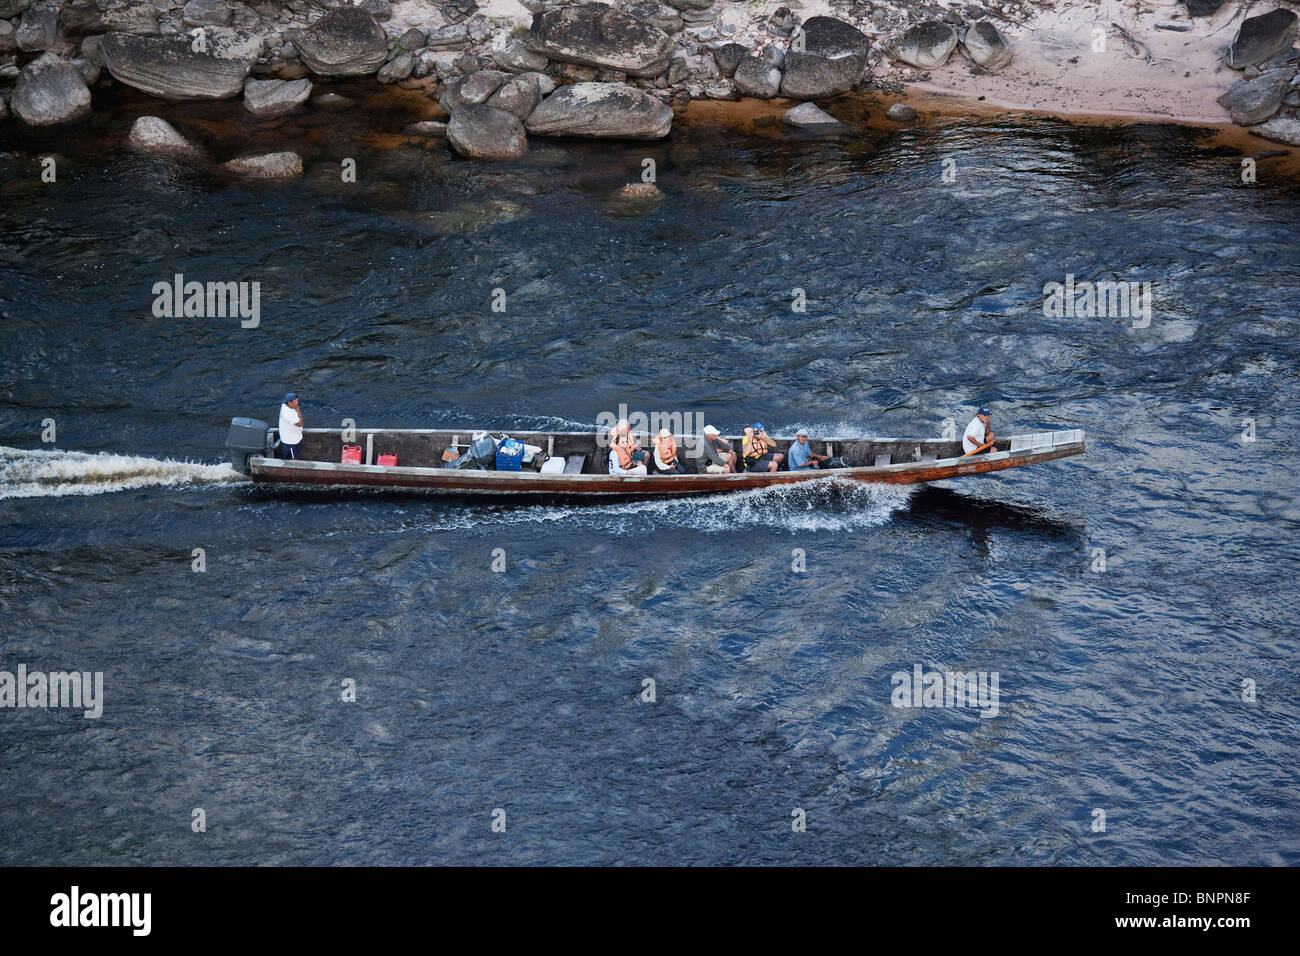 Tourists in boat on their way to explore Angel Falls Canaima National Park  Venezuela Stock Photo